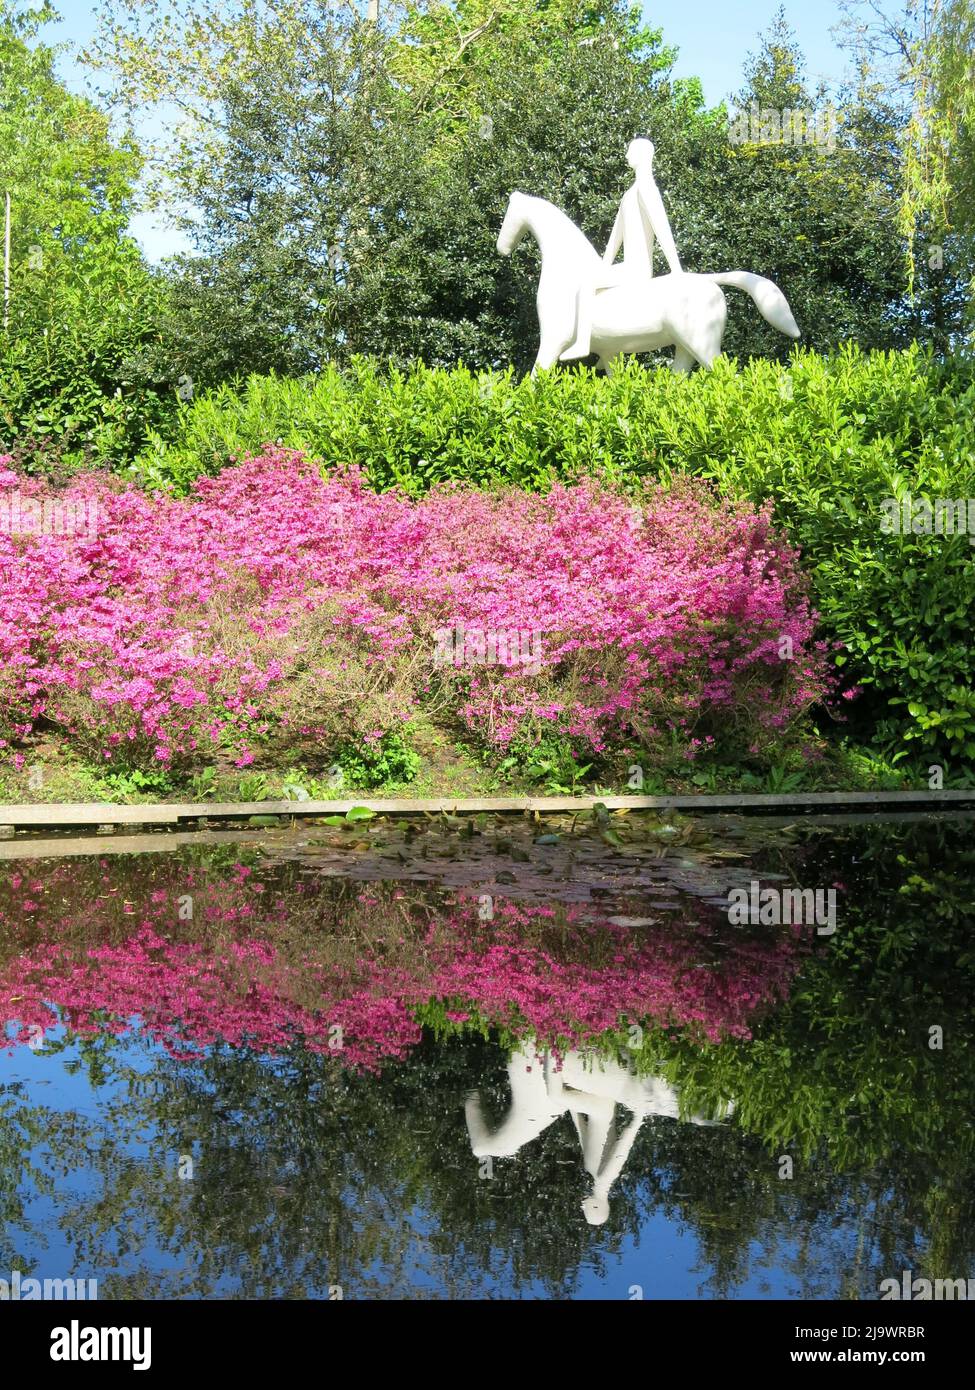 White sculpture of a man on a horse with the mass planting of pink & purple tulips, both reflected in the water at Keukenhof 2022. Stock Photo